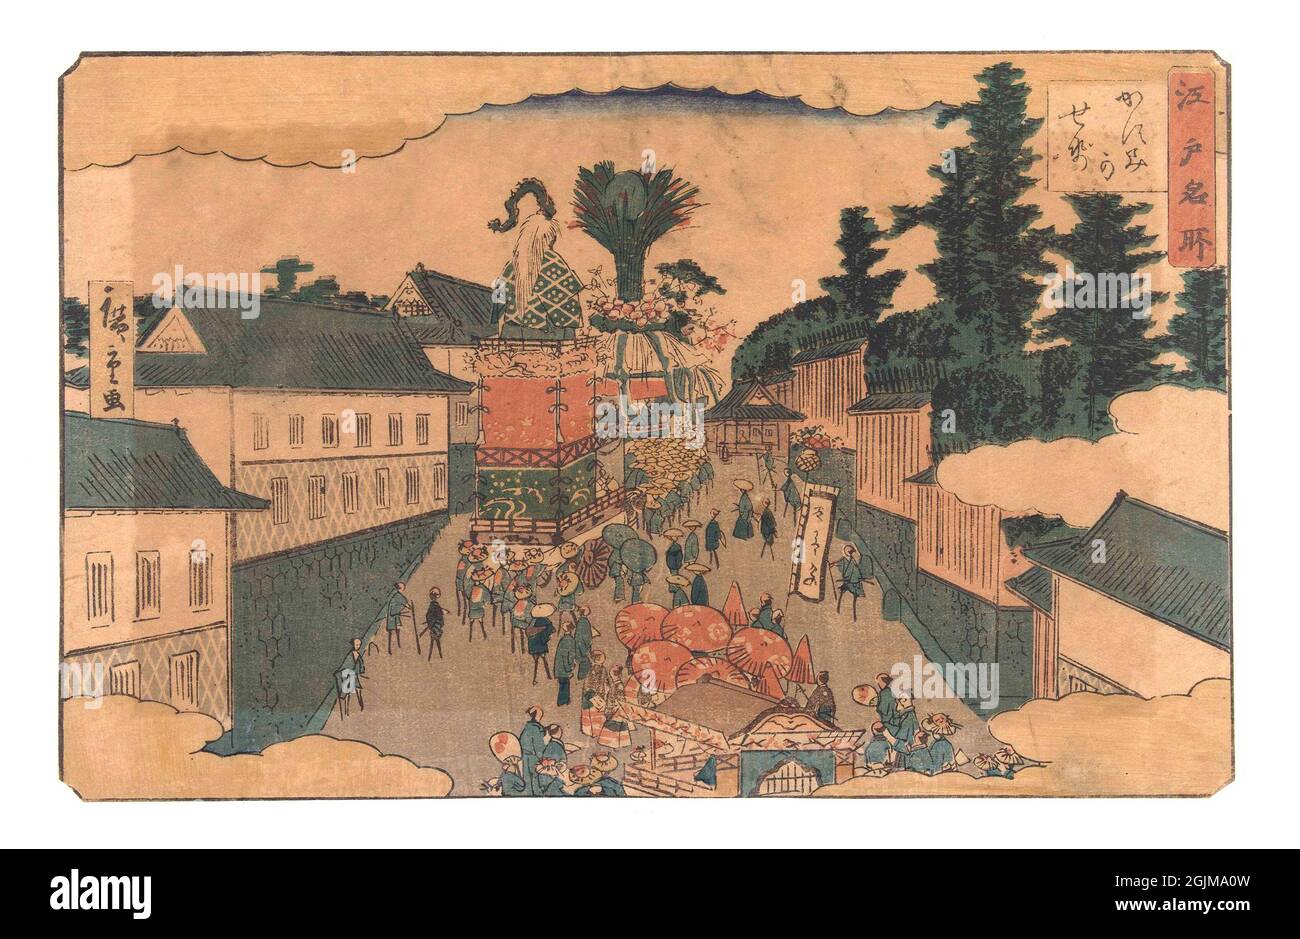 Parade in Kasumigaseki from 'Famous Places in Edo.' Festive procession of decorated cars and groups of people in a street between tall buildings and the fence of a park. Cloud patterns at the bottom and top of the print.  Digitally optimised mid-nineteenth century Japanese woodcut illustration. Stock Photo